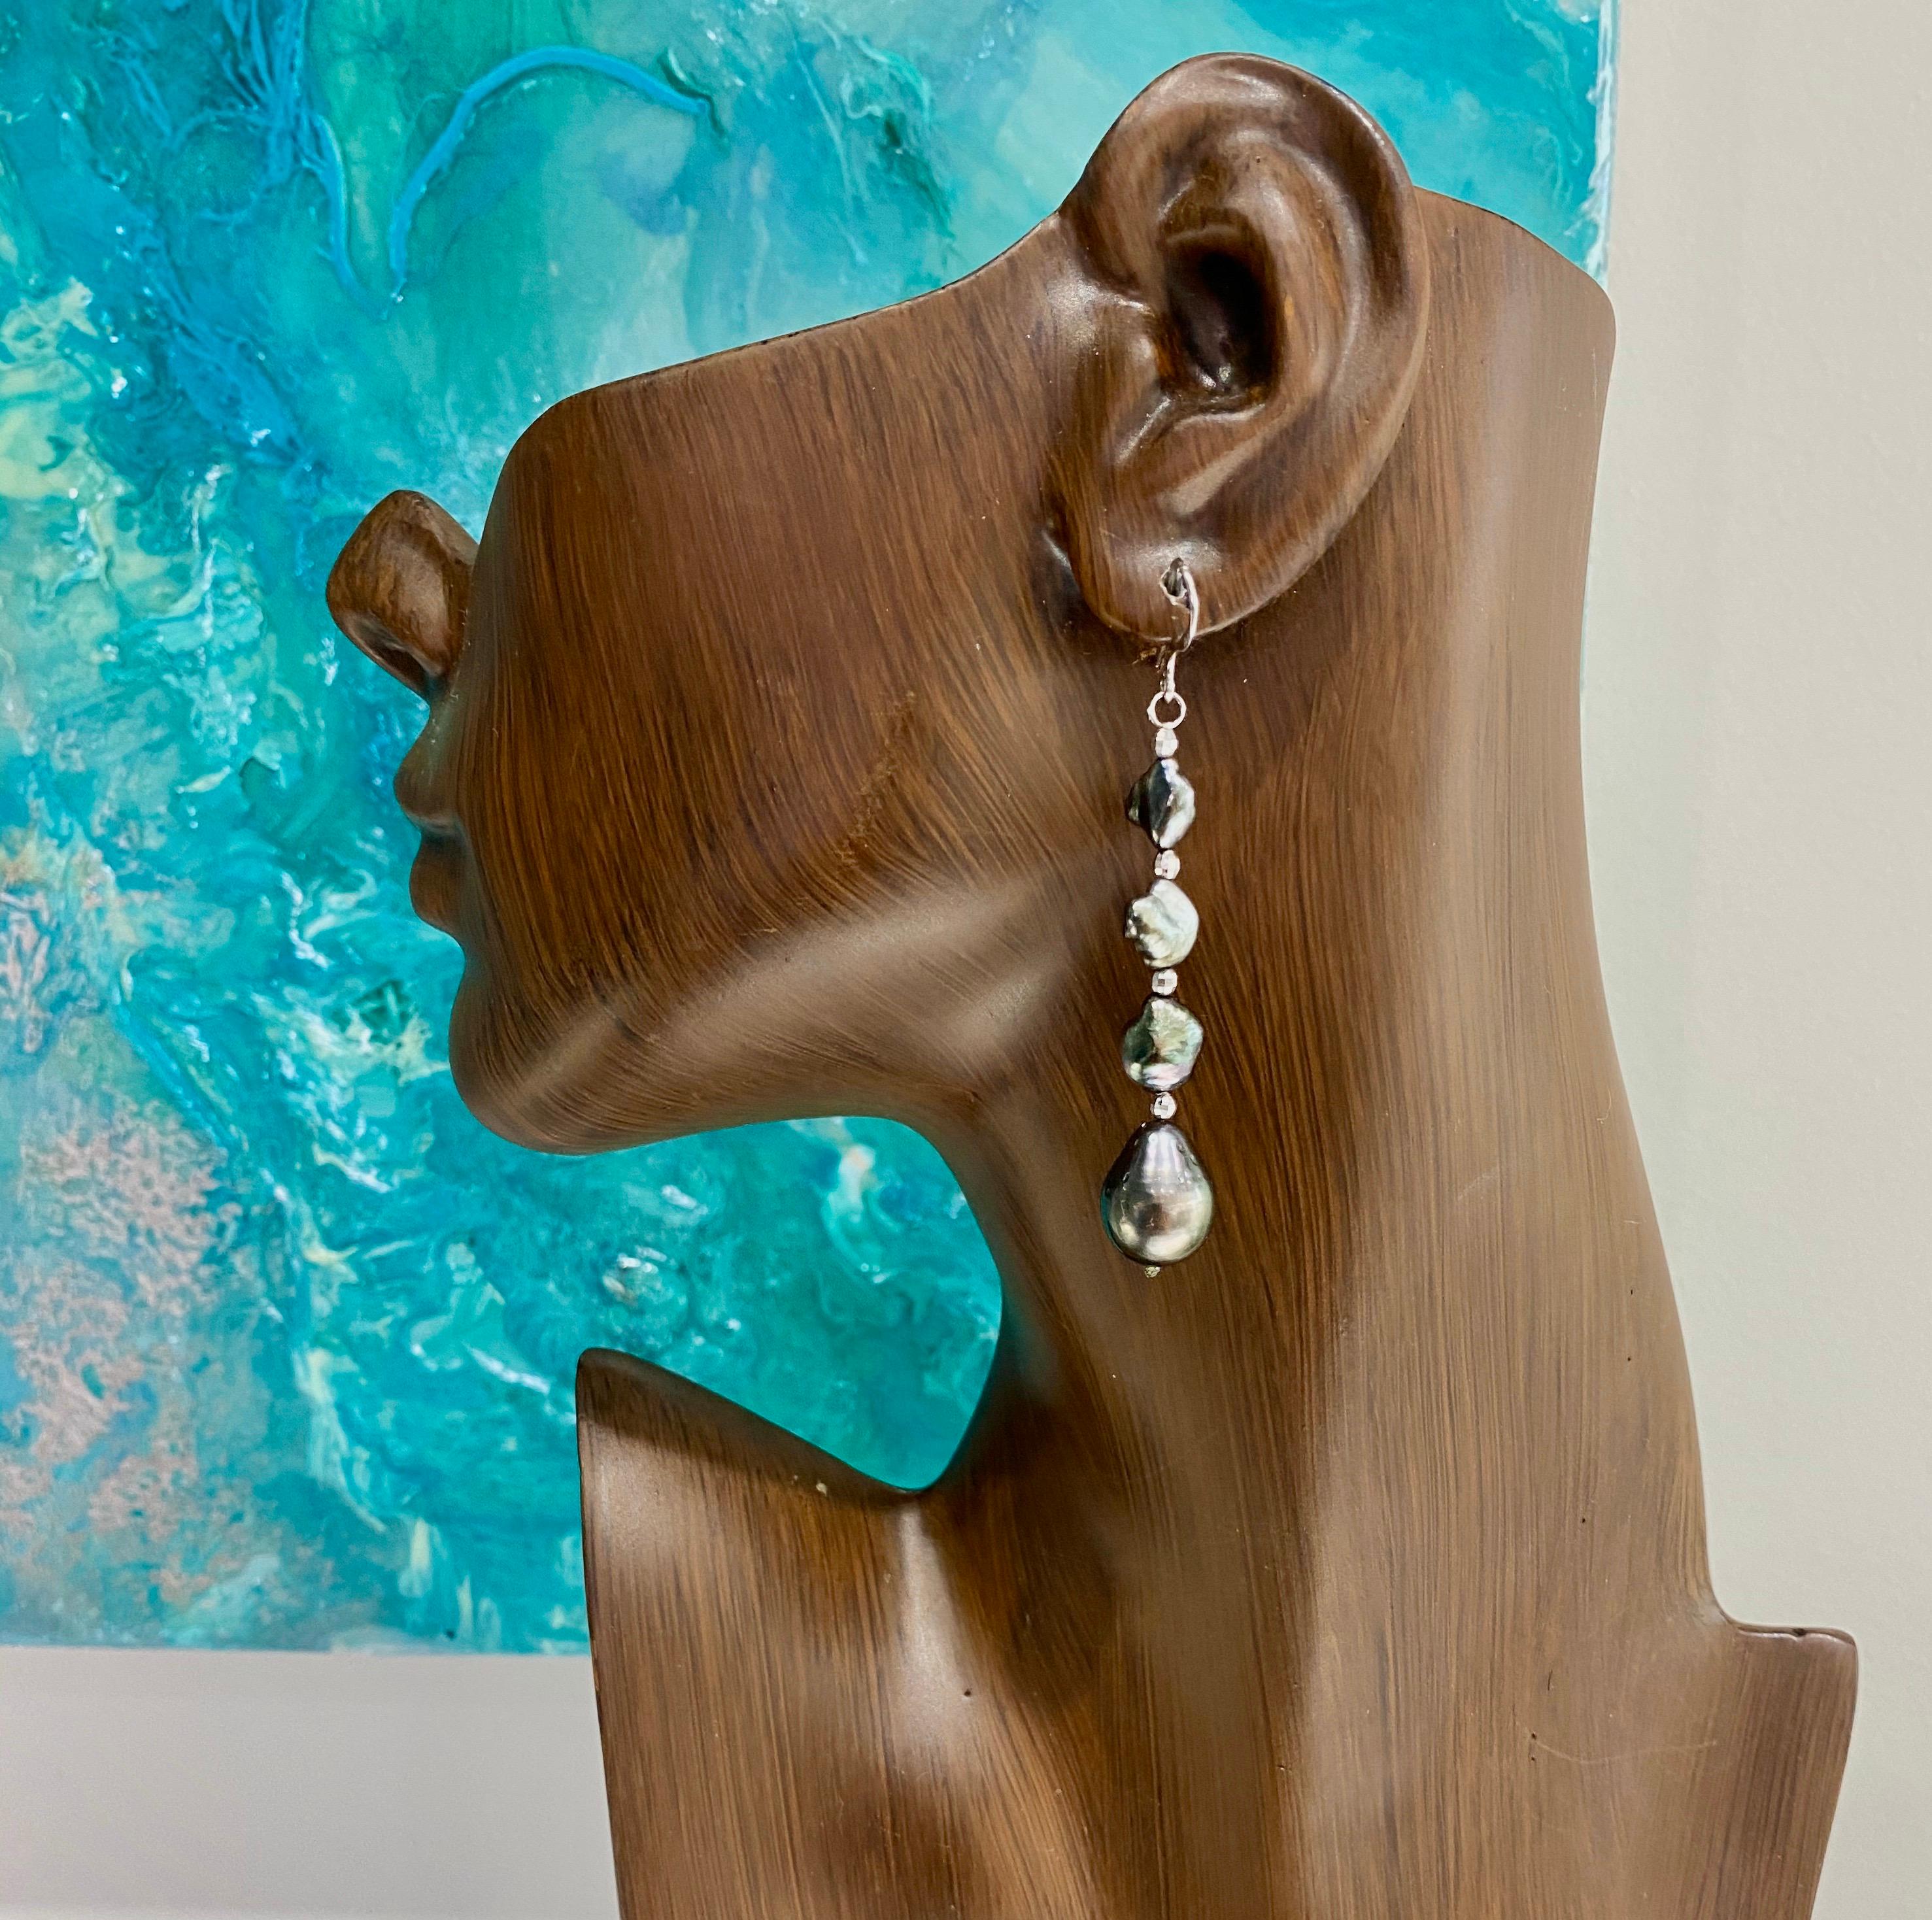 These stunning earrings are made of Tahitian drop shaped pearls, 12mm and Tahitian Keishi pearls, naturally colored with beautiful luster.  They dangle from a sterling silver hook and have diamond cut sterling silver accent beads for some sparkle. 